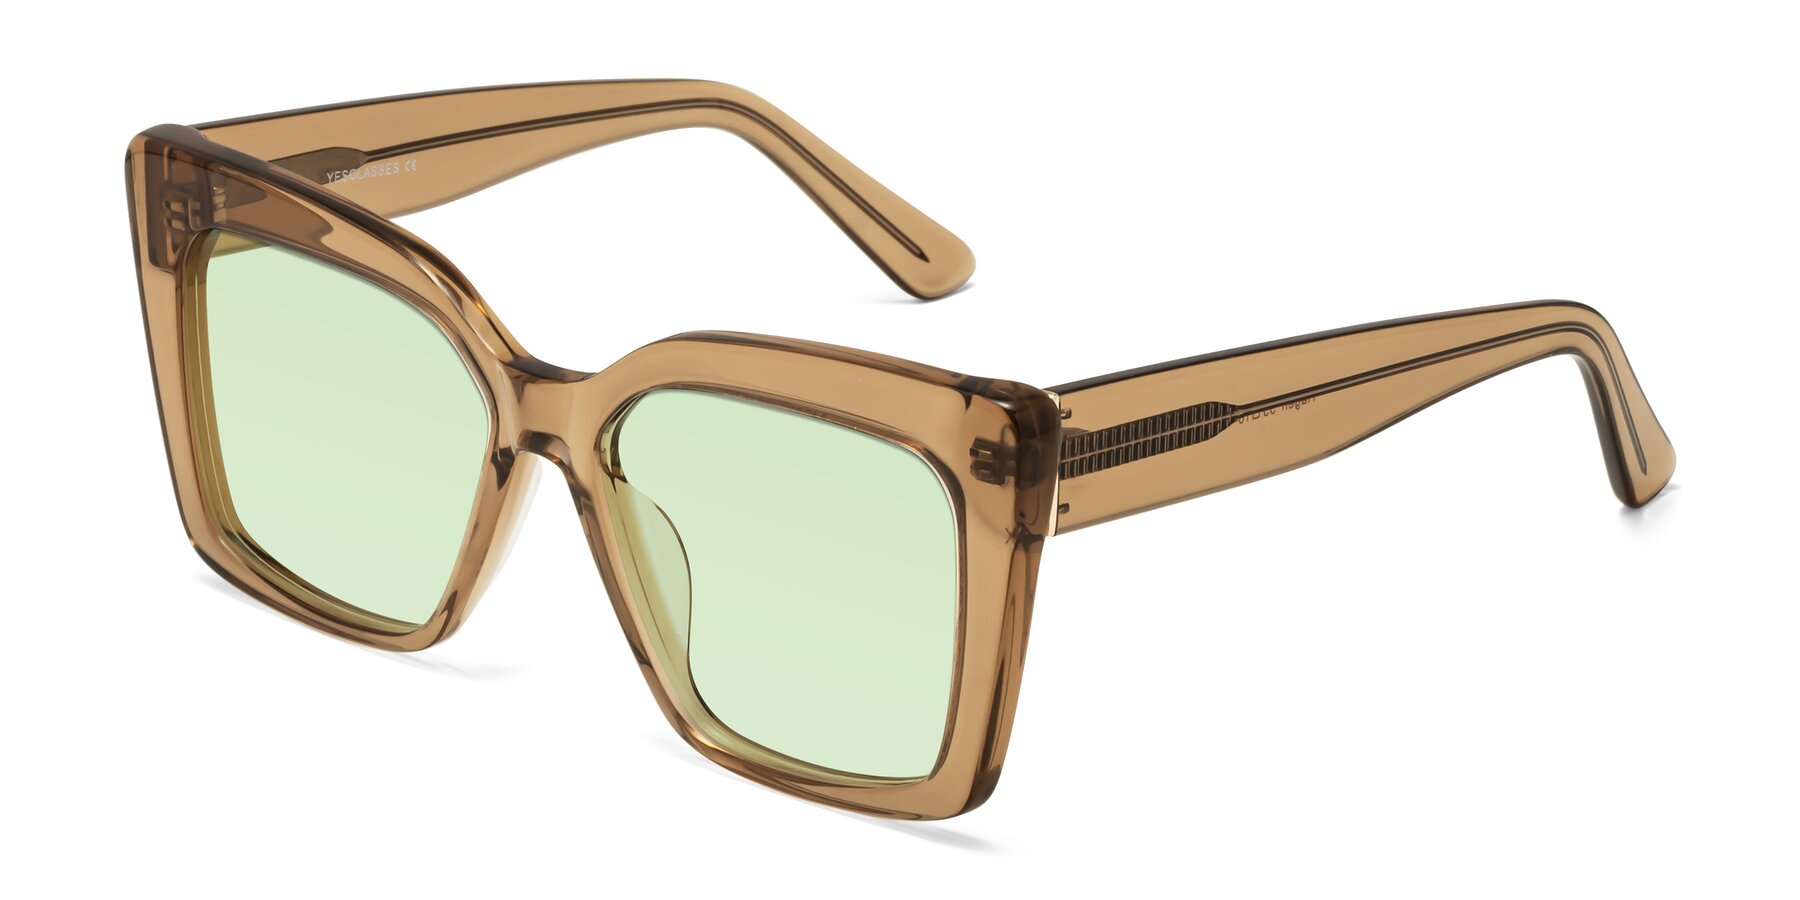 Angle of Hagen in Translucent Brown with Light Green Tinted Lenses